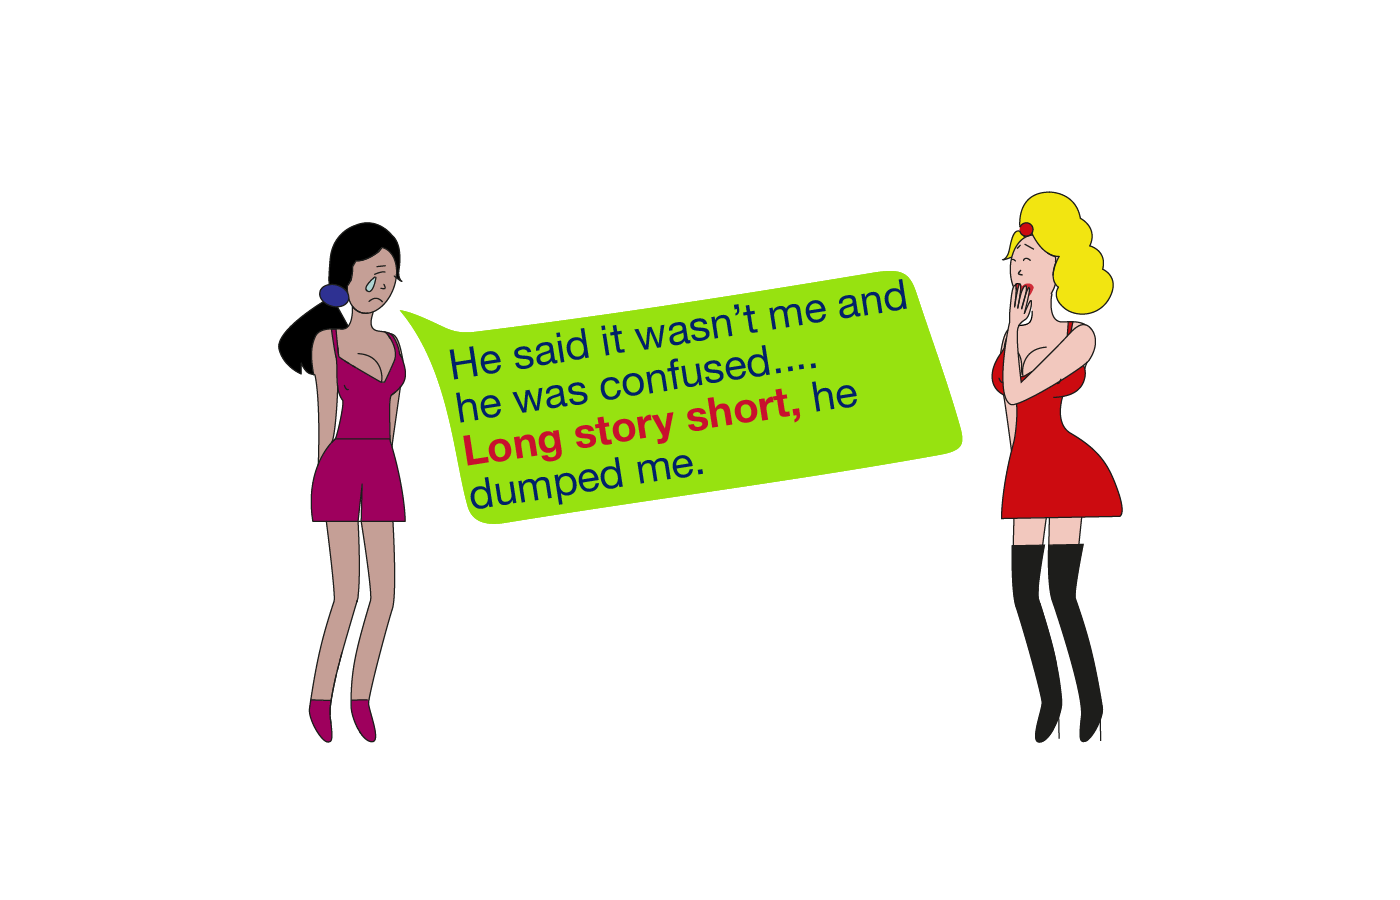 Long story short idiom meaning